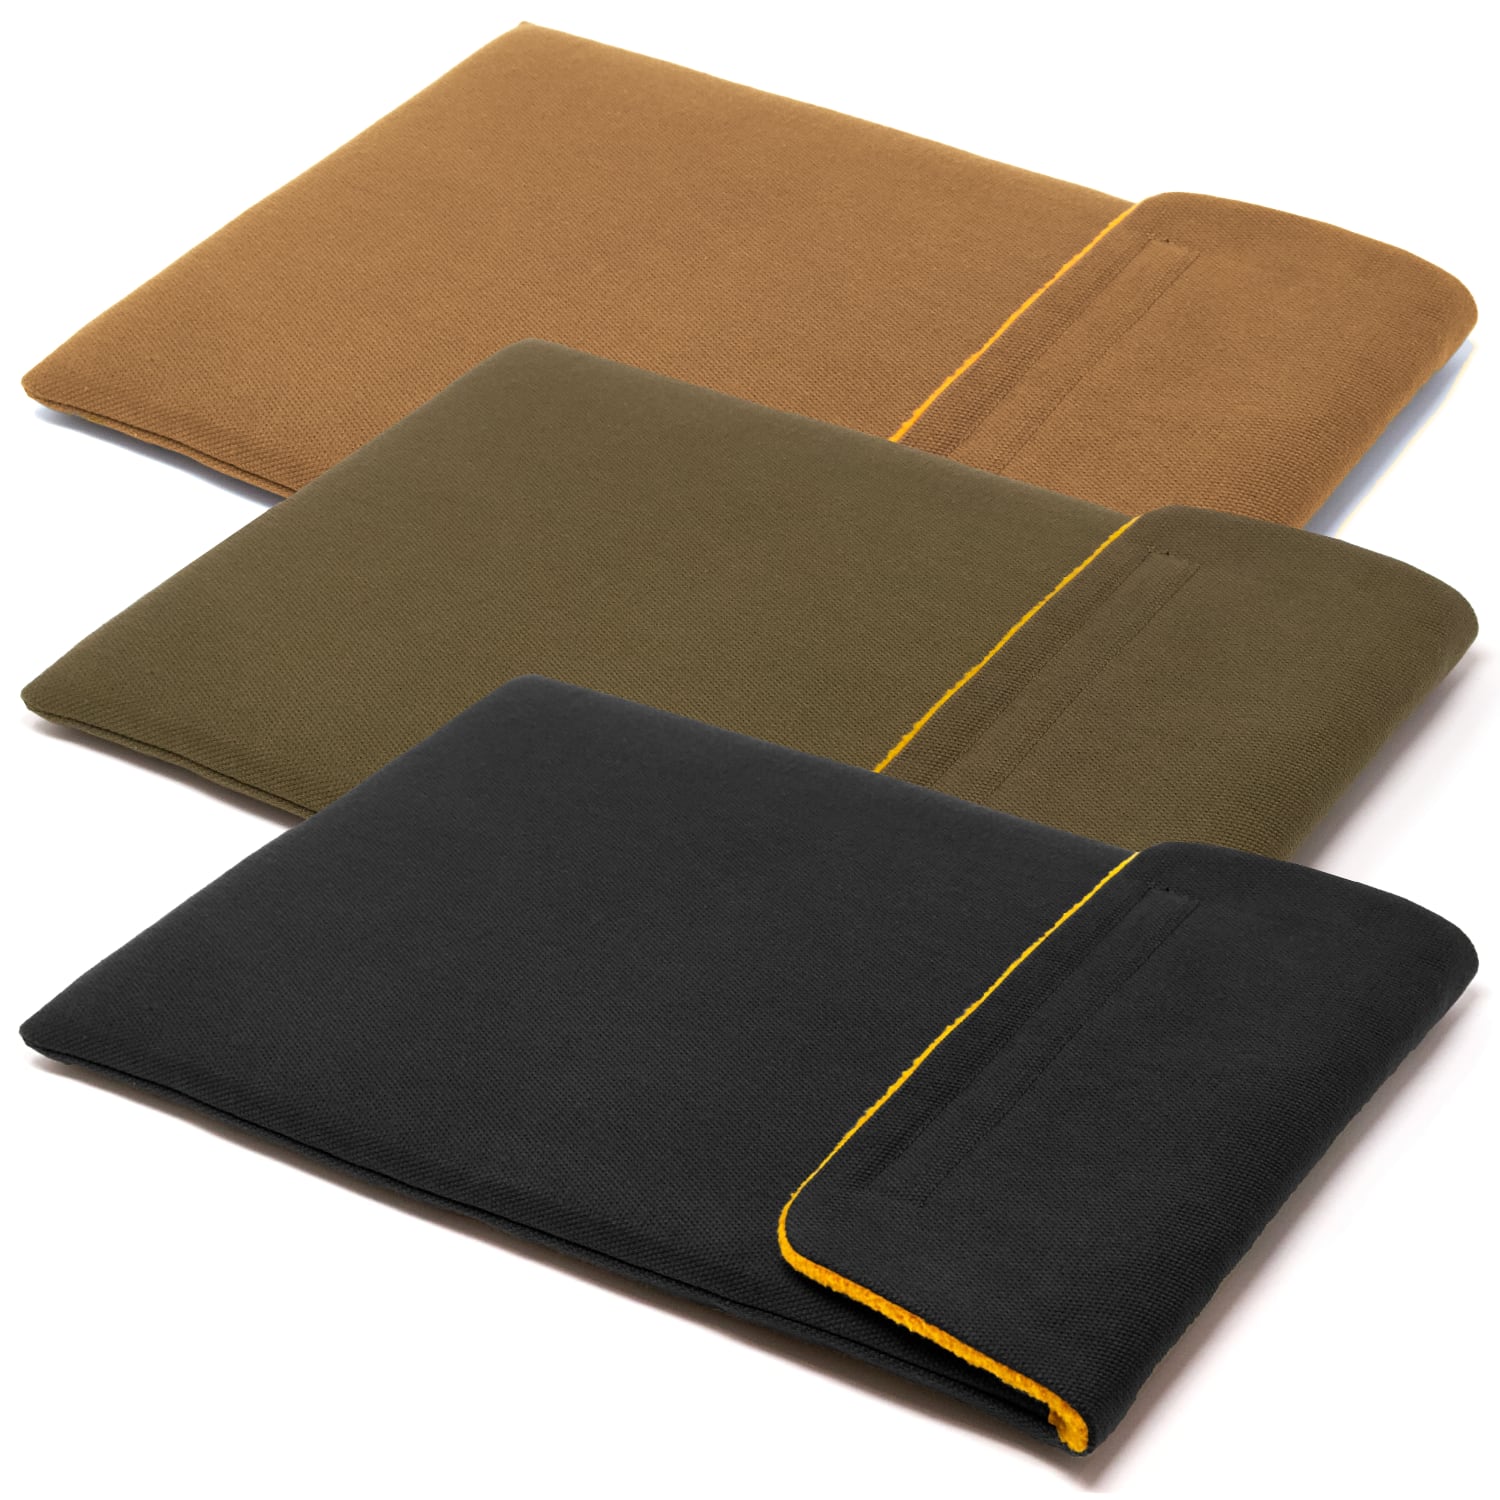 HP Spectre x360 Sleeves and Cases